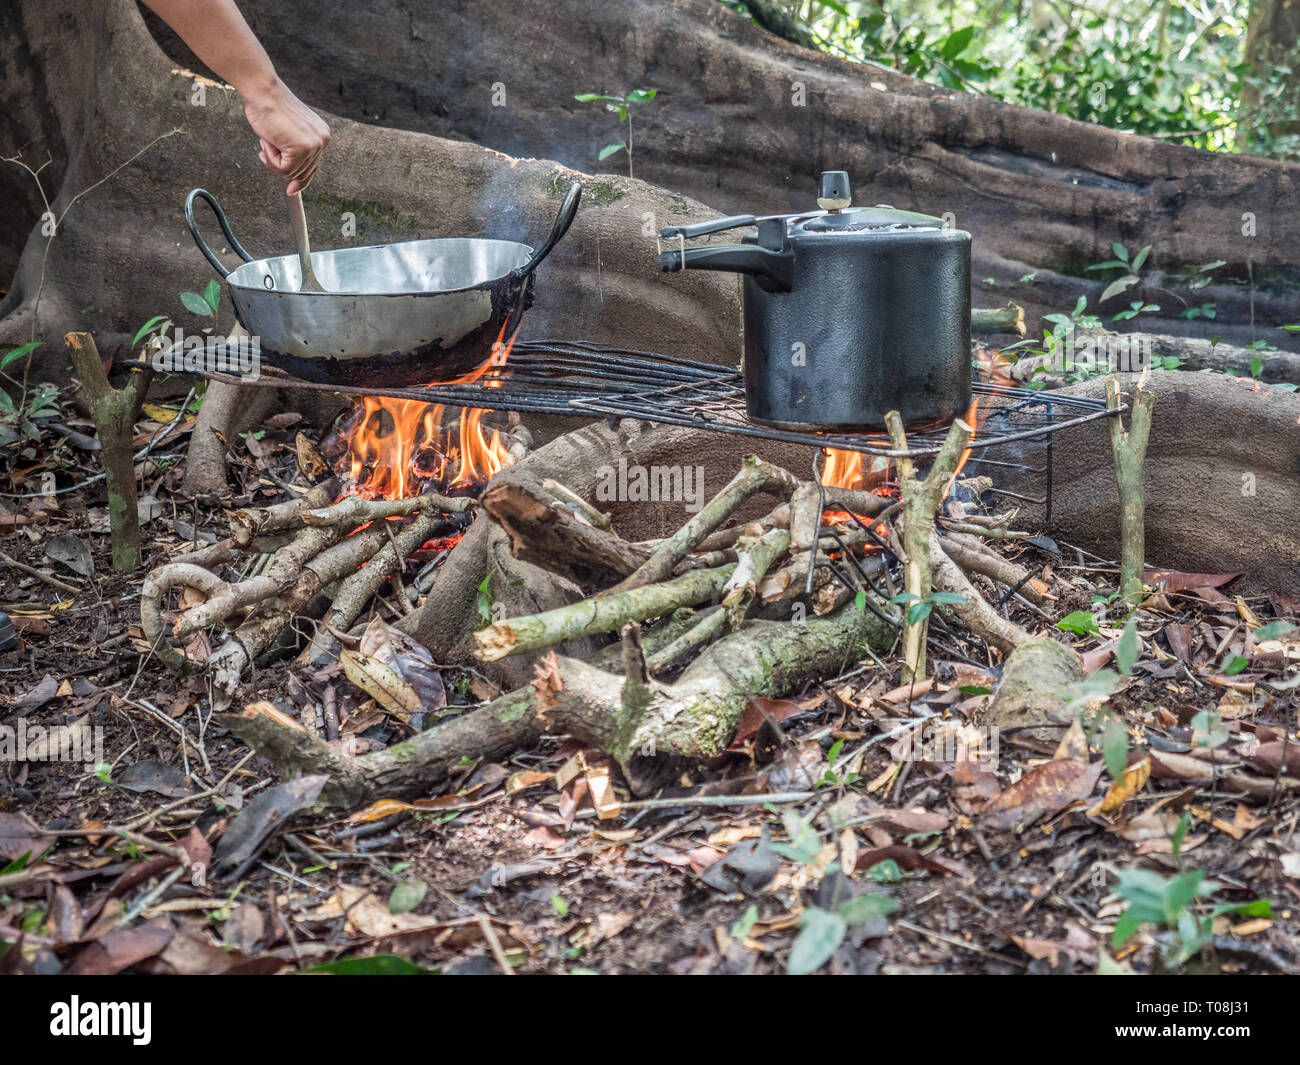 Lagoon, Brazil - November  27, 2017: Cooking on the fireplece on the camp in the amazons jungle Stock Photo